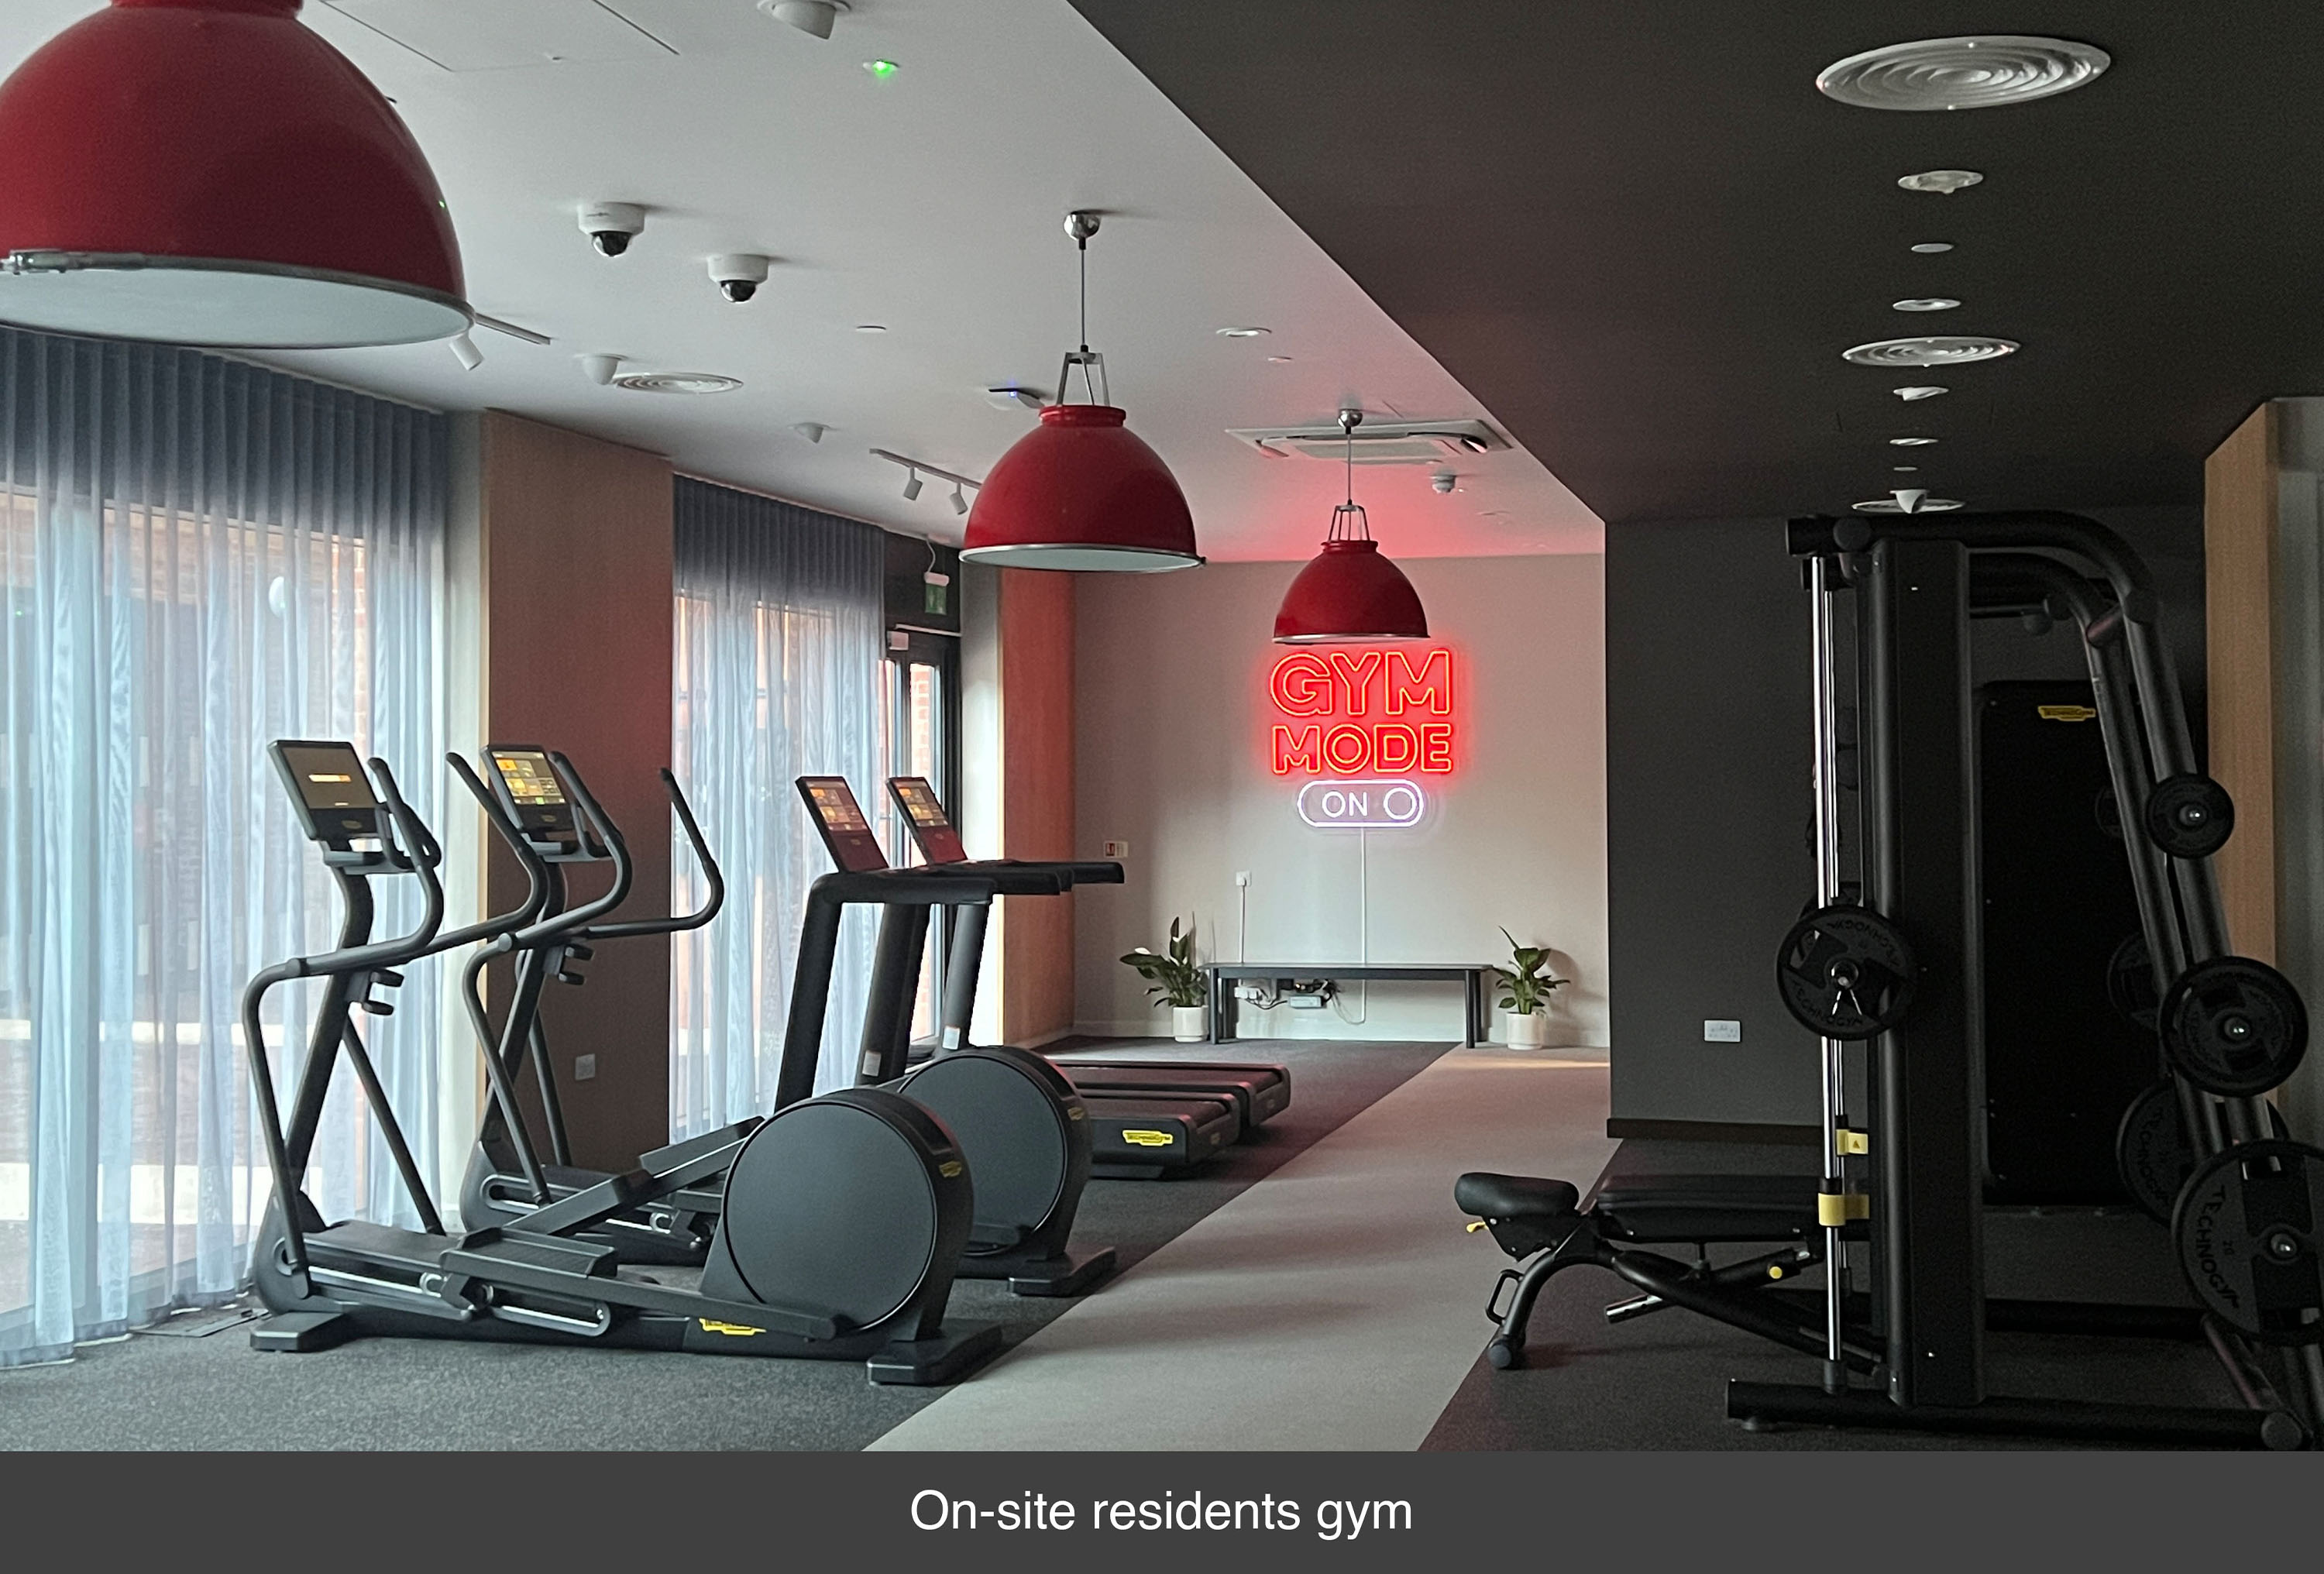 On-site residents gym